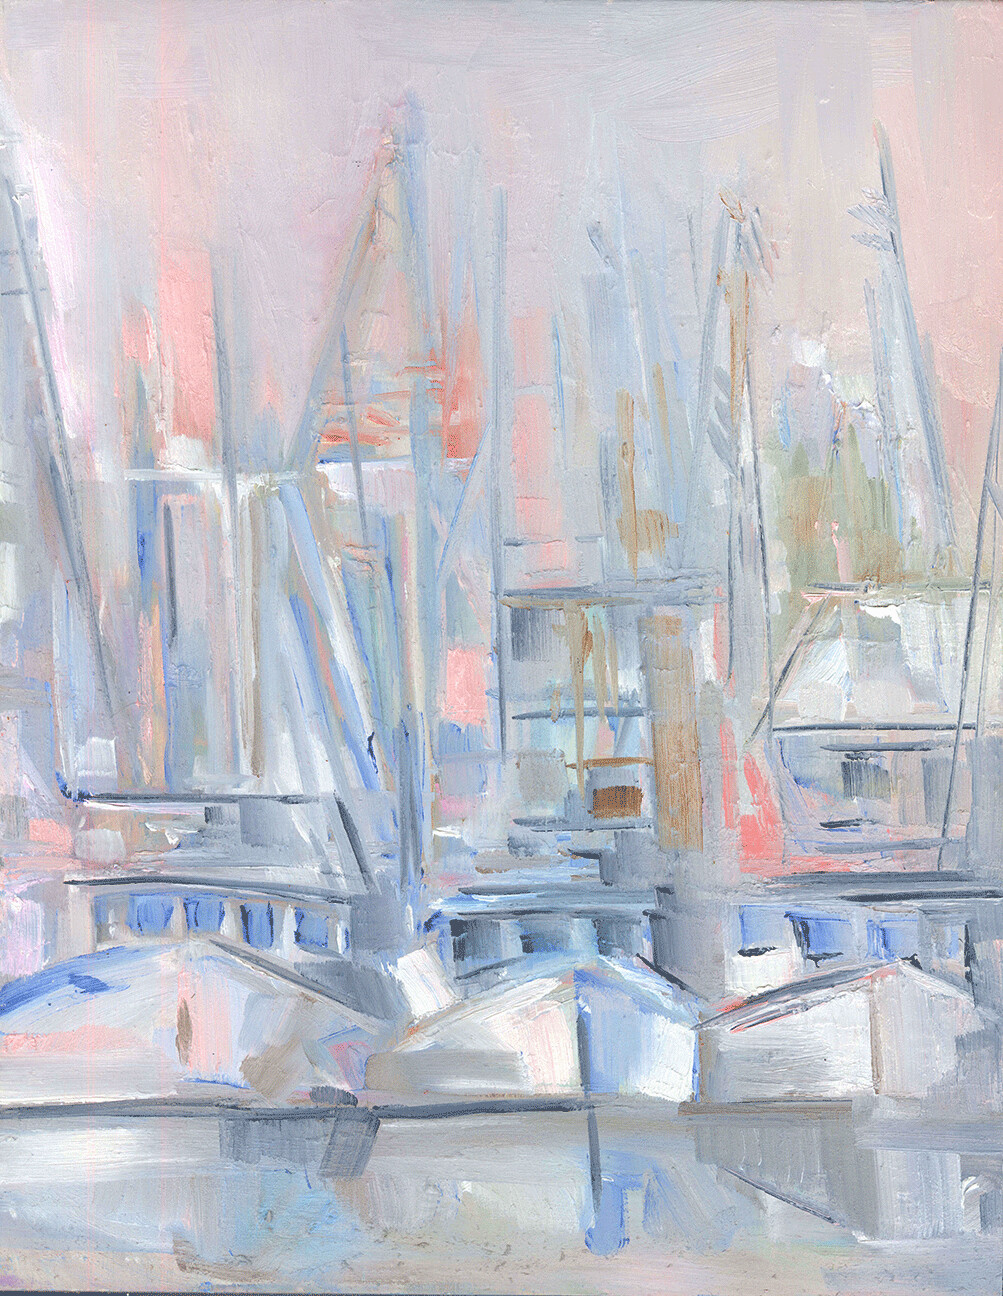 "Blush Boats-2" by Danielle Cather-Cohen